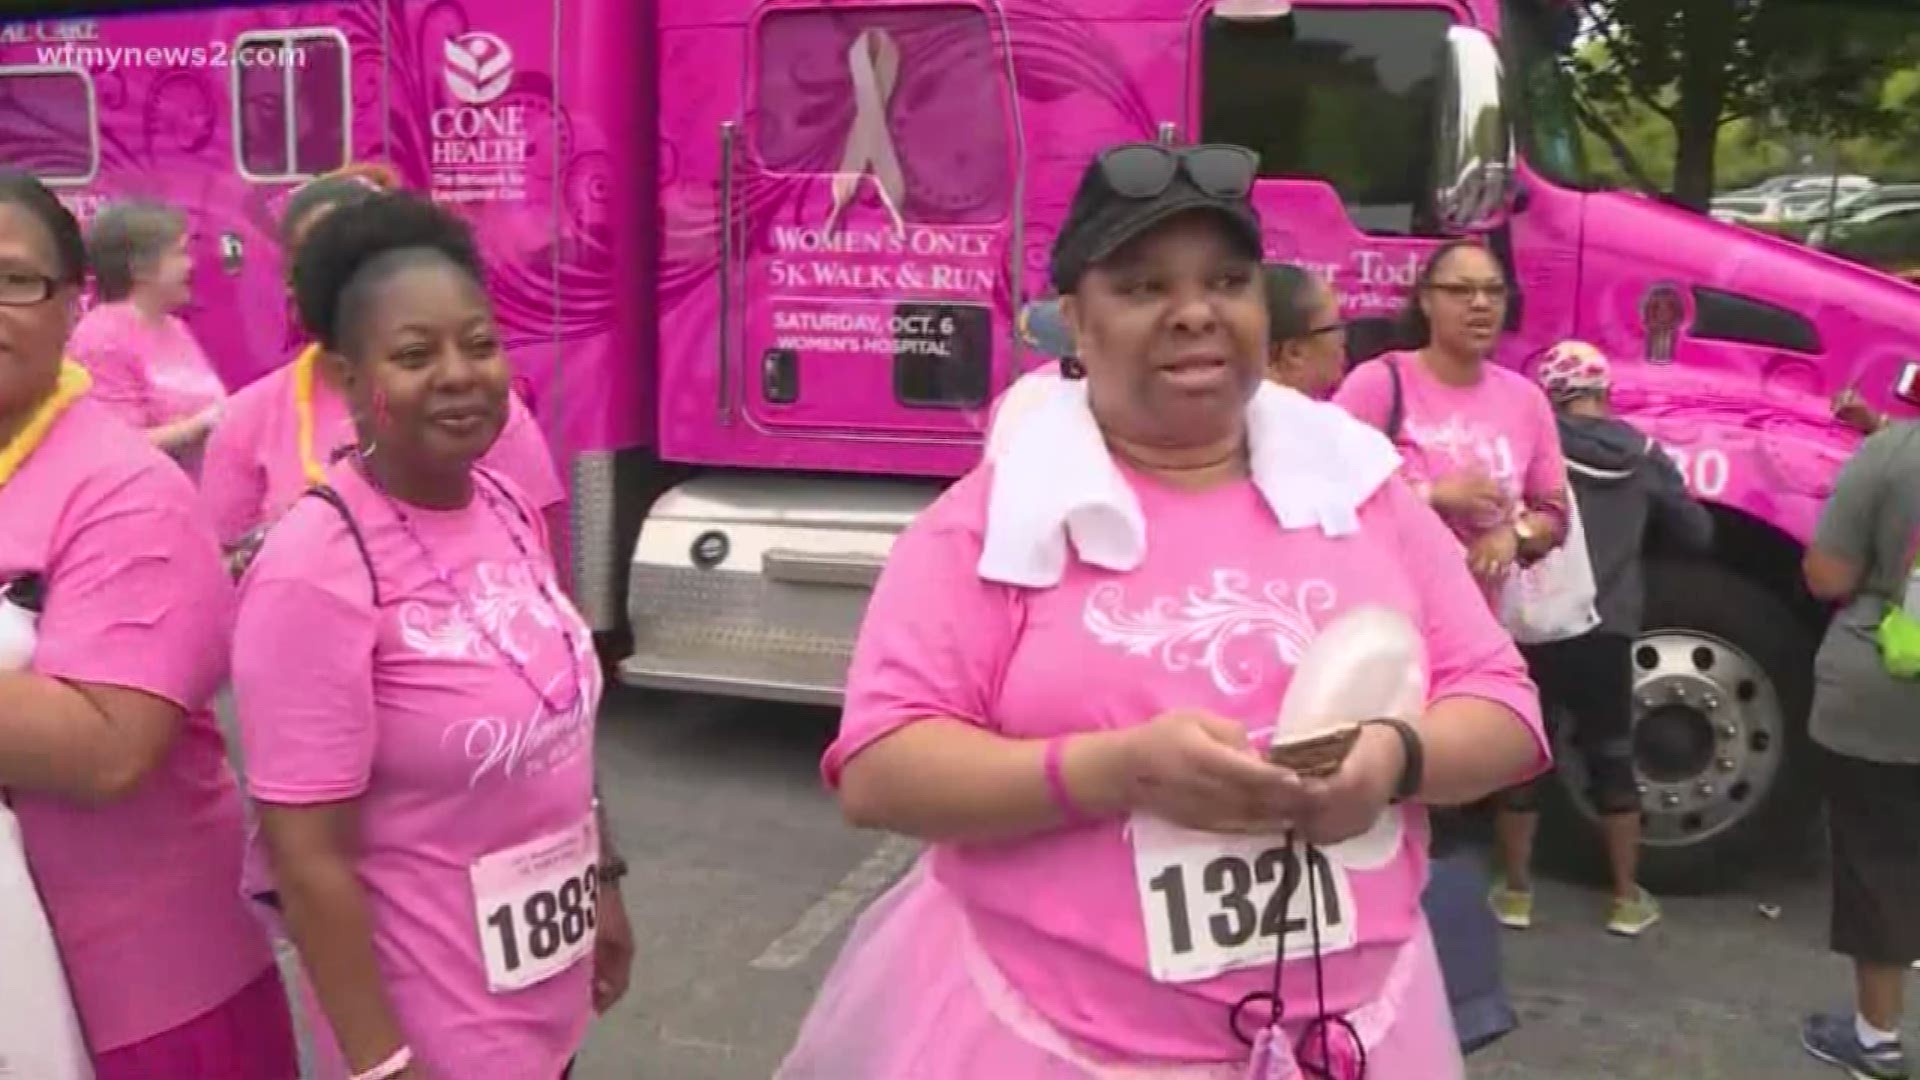 Thousands Participate In Women's Only 5K In Greensboro